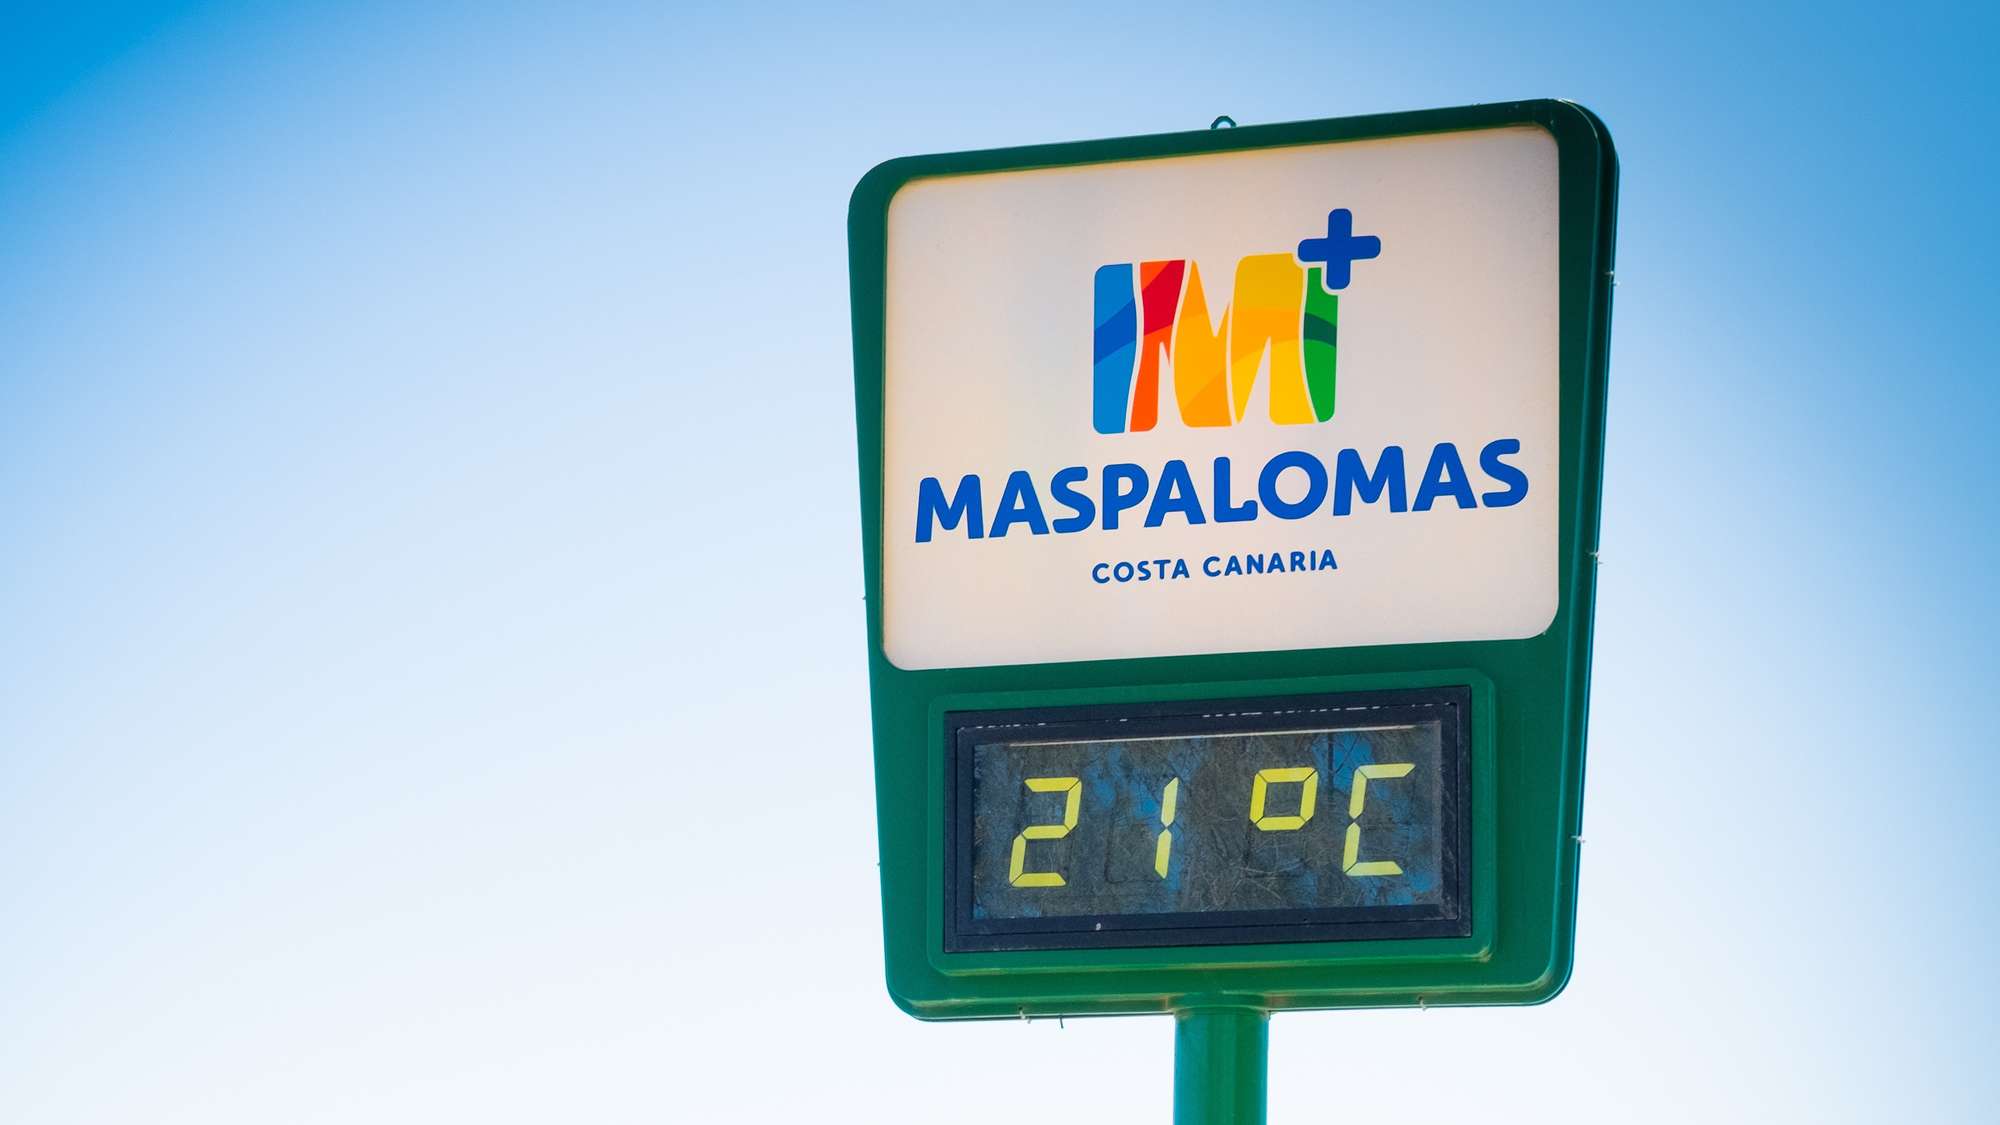 A large sign saying 'Maspalomas, Cosa Canaria' with the current temperature '21 °C'